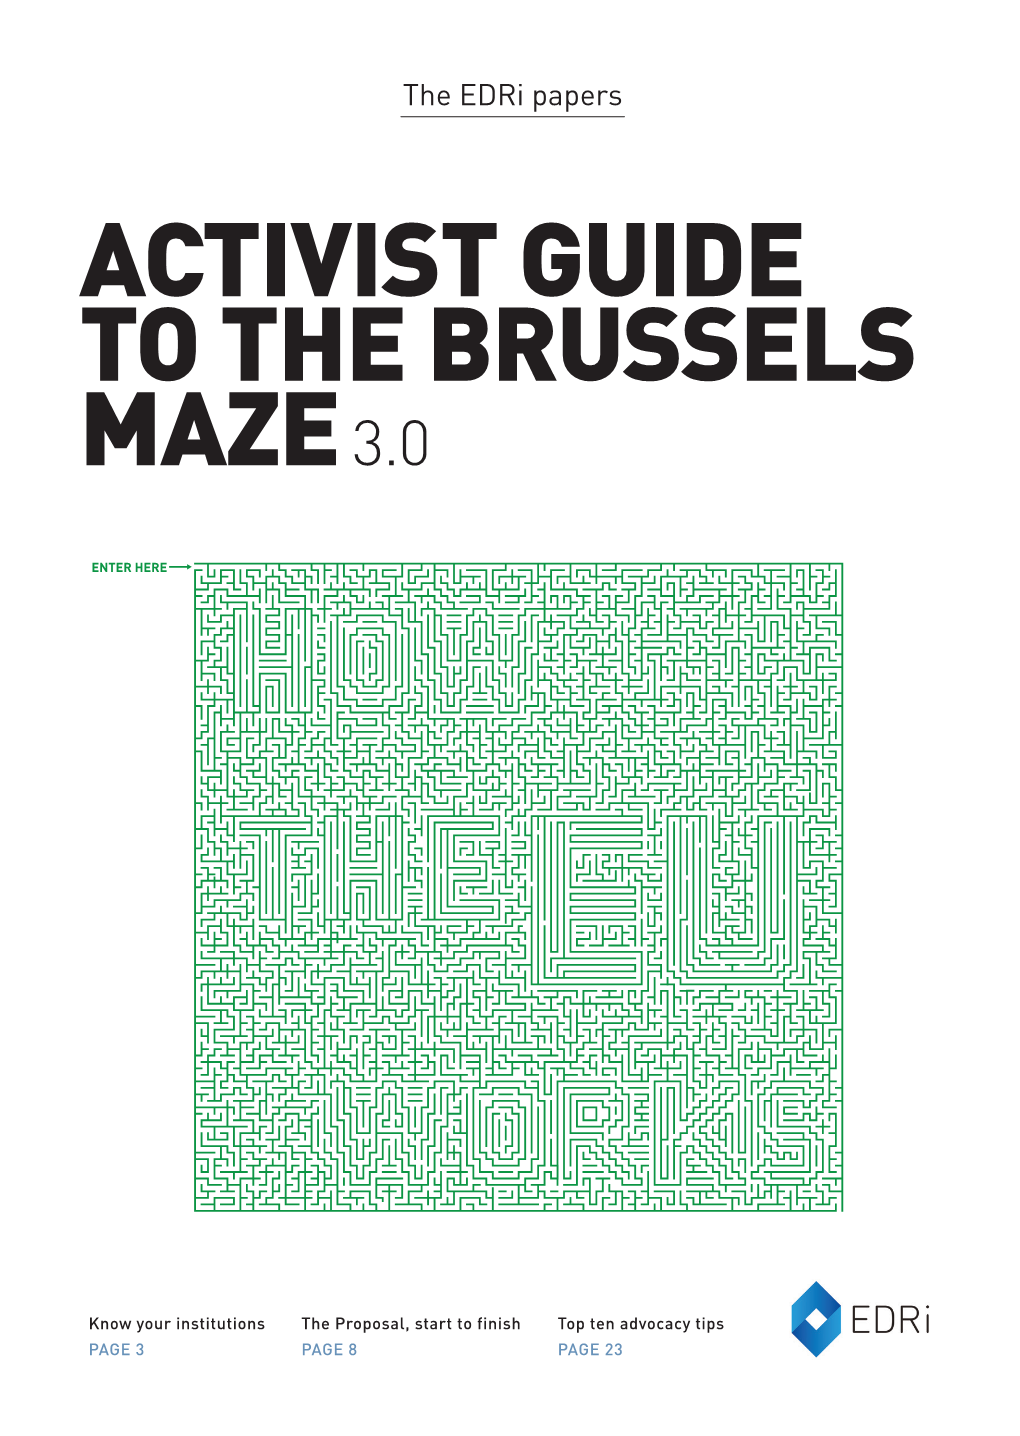 Brussels Activist Guide Here